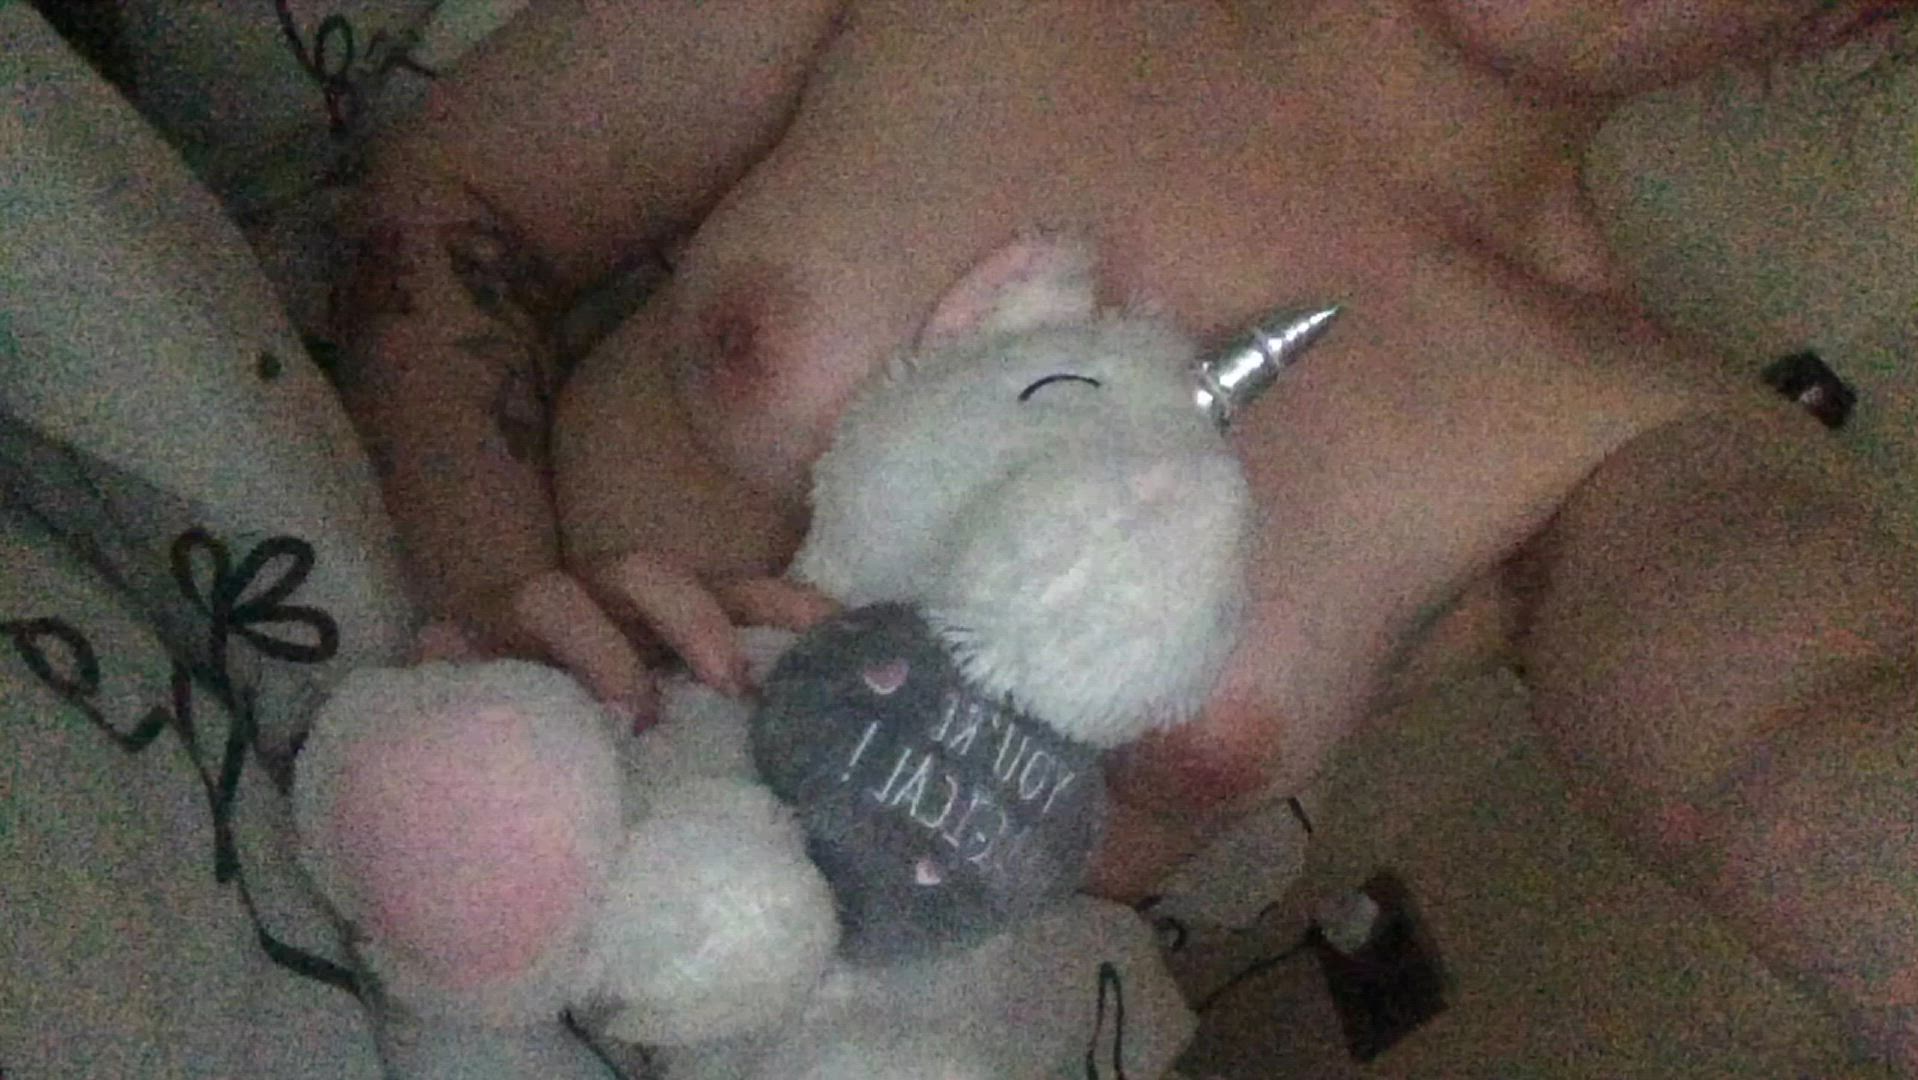 Tits porn video with onlyfans model spitwicked <strong>@spitwicked</strong>